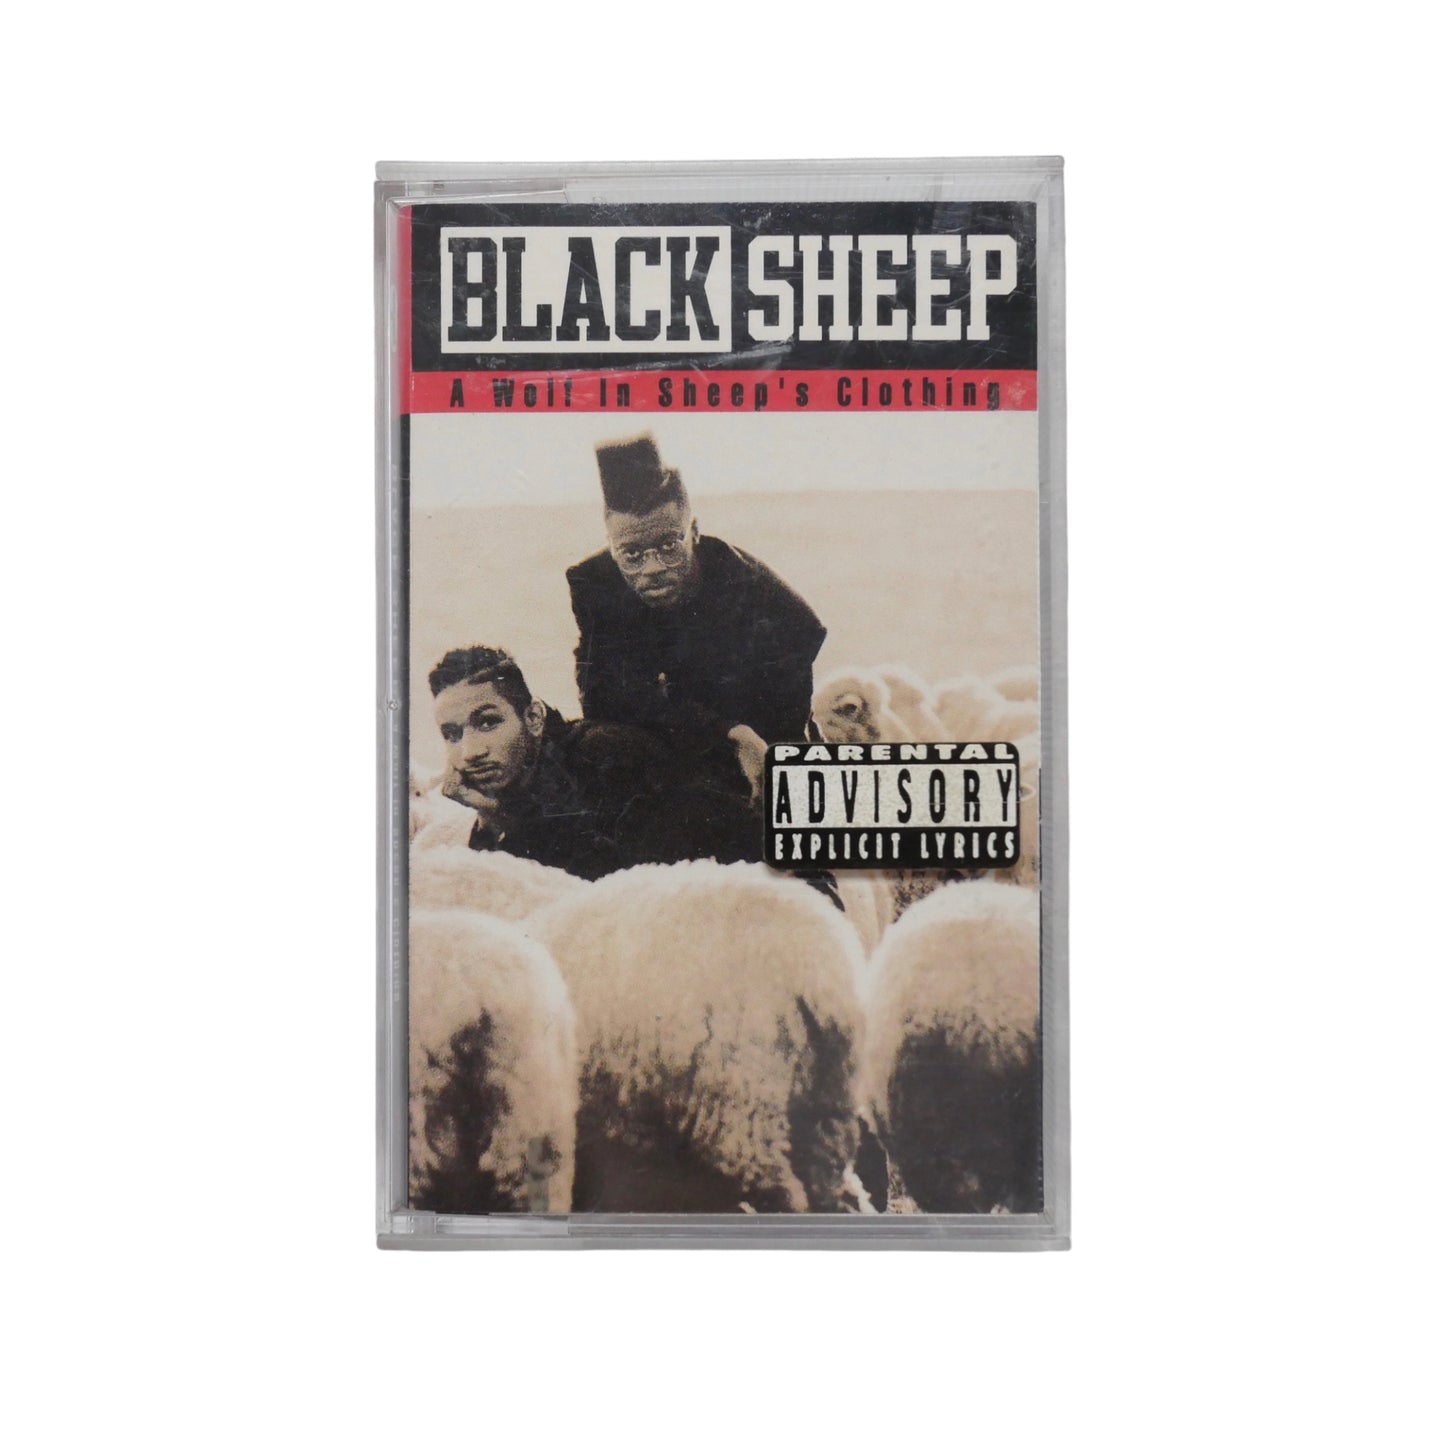 Black Sheep A Wolf in Sheep’s Clothing Cassette